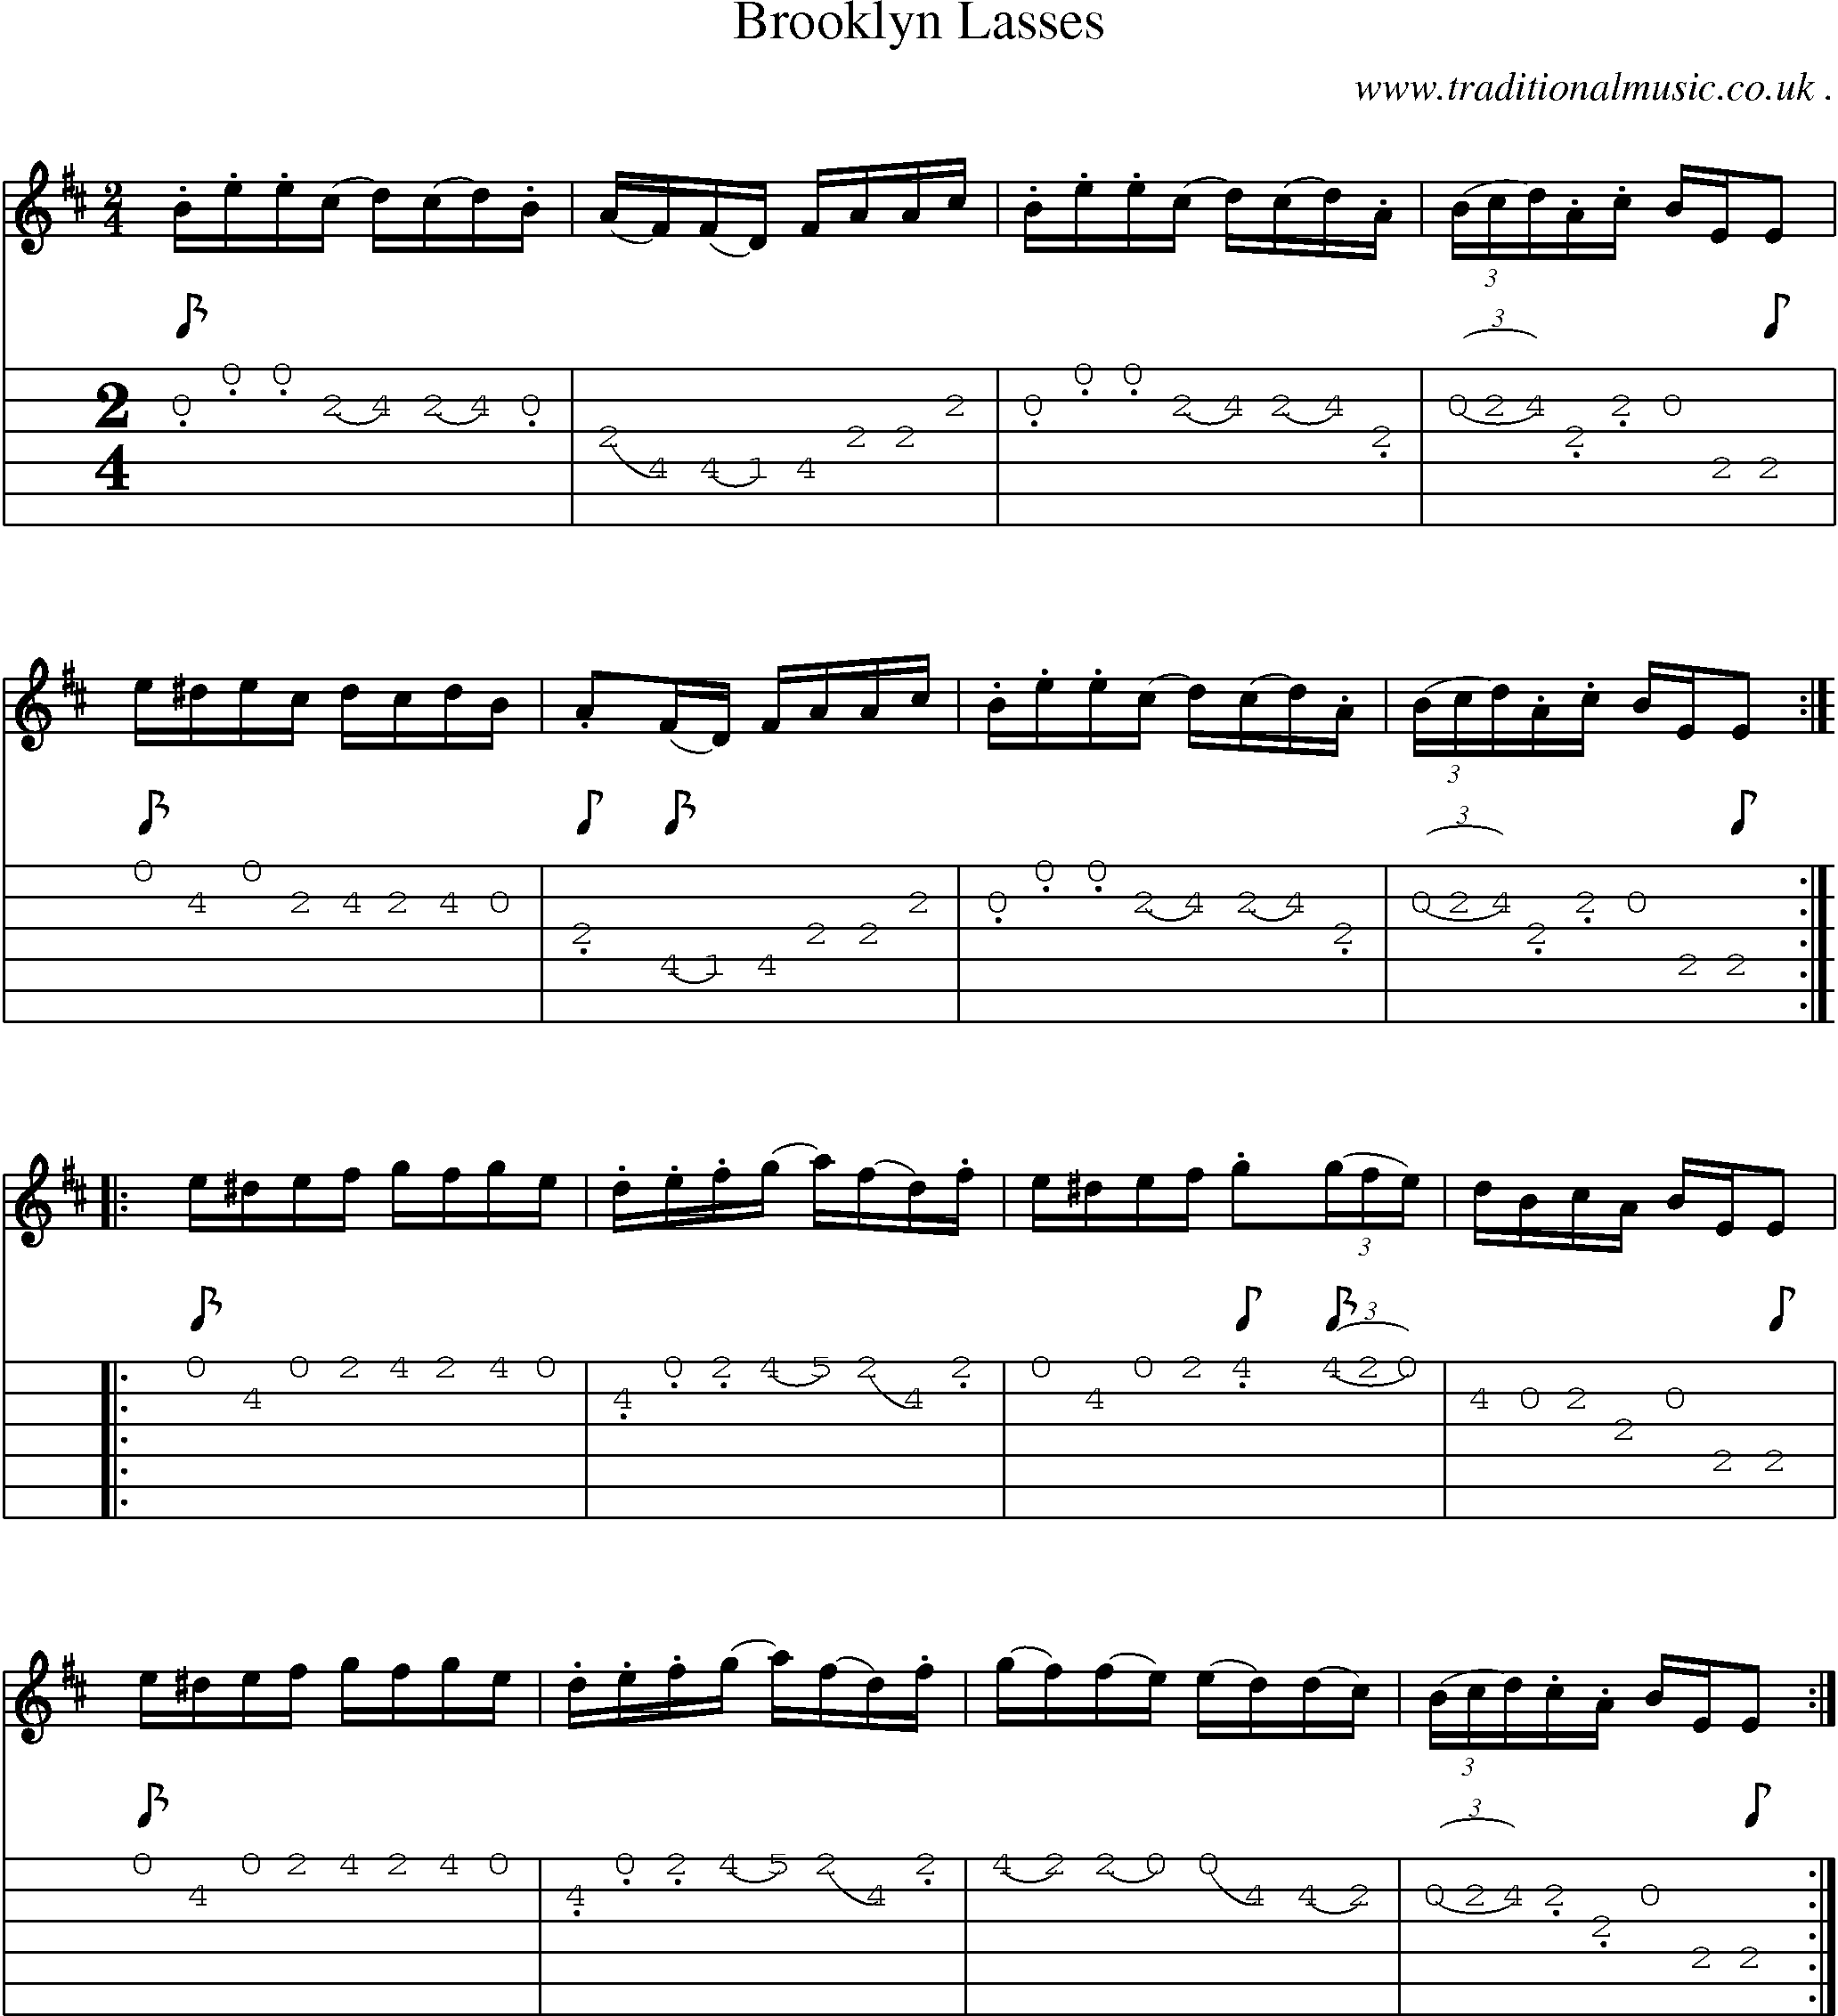 Sheet-Music and Guitar Tabs for Brooklyn Lasses